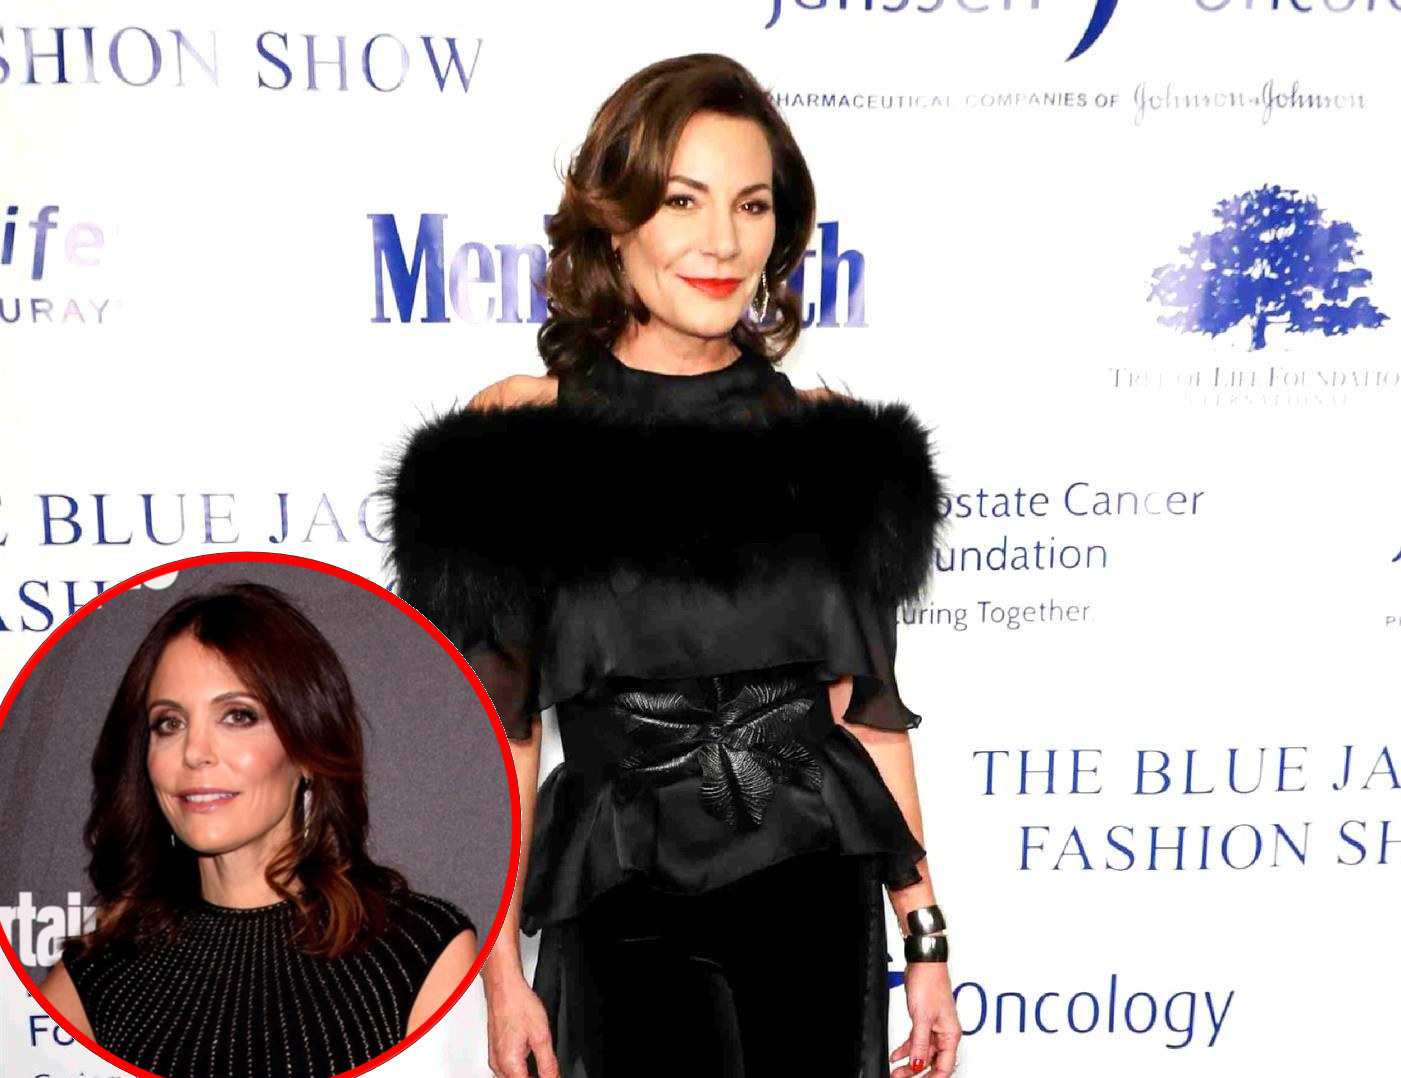 Luann de Lesseps Suggests Bethenny Frankel Left RHONY Because Bravo Refused to Give Her a Raise and Explains Why She Was "Annoying," Plus She Addresses Her Drinking in the Trailer